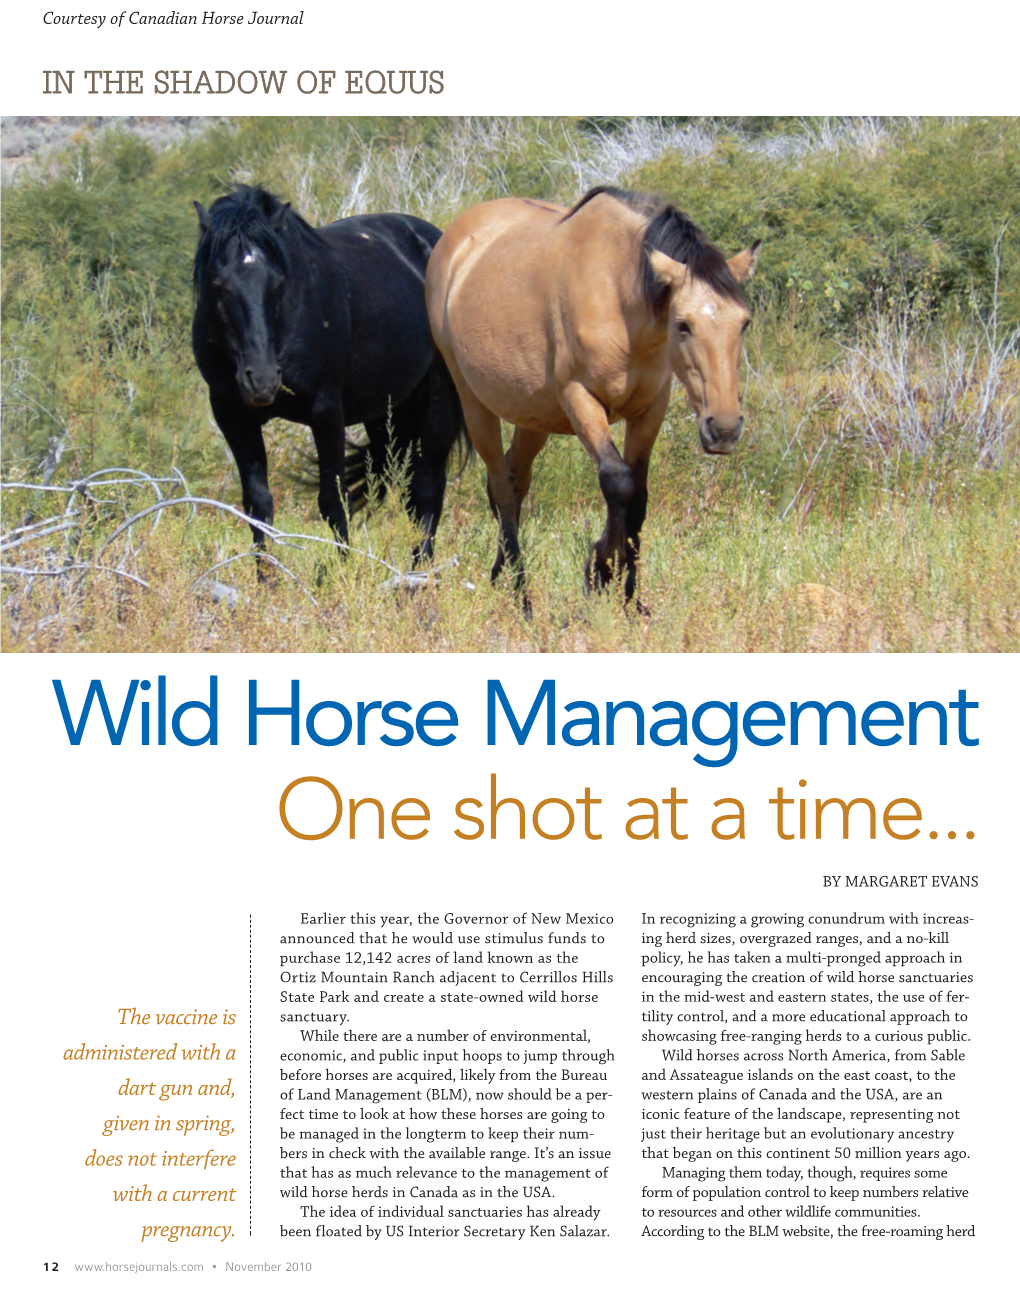 Wild Horse Management One Shot at a Time